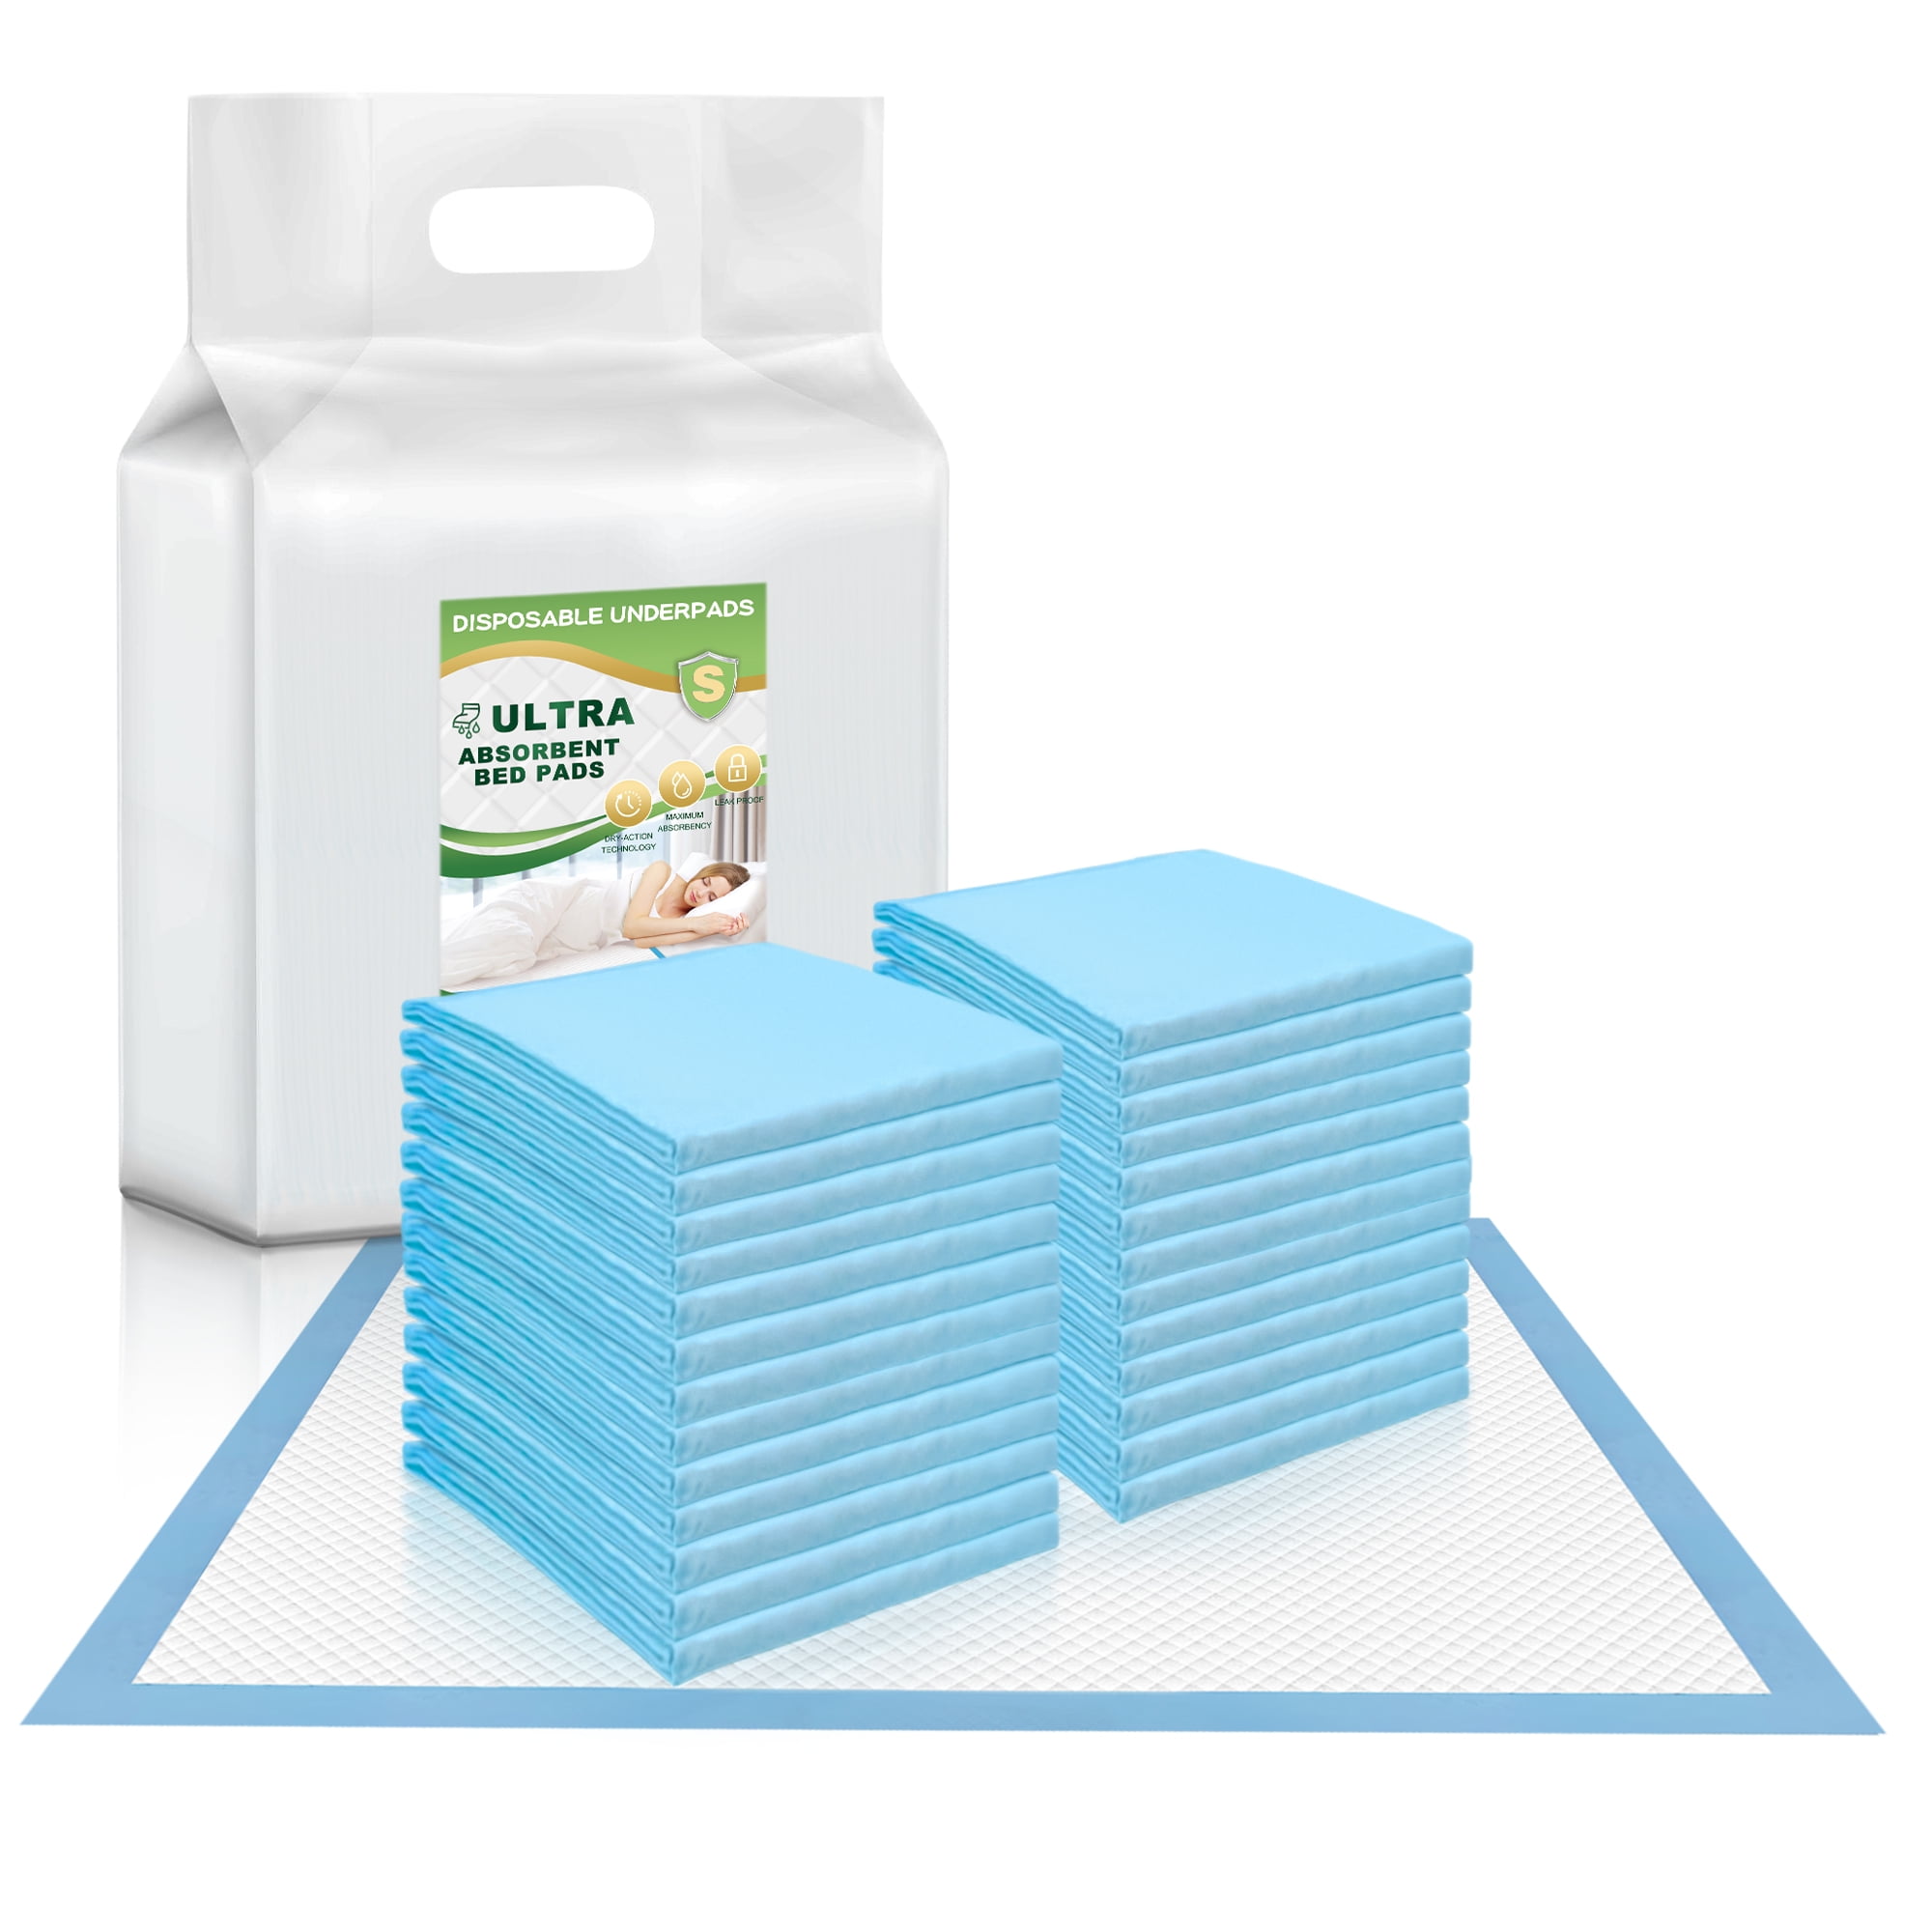 Disposable Underpad,15PCS/Bag Super Absorbent Disposable Urine Pad  Incontinence Bed Pads Industry-Leading Standards 